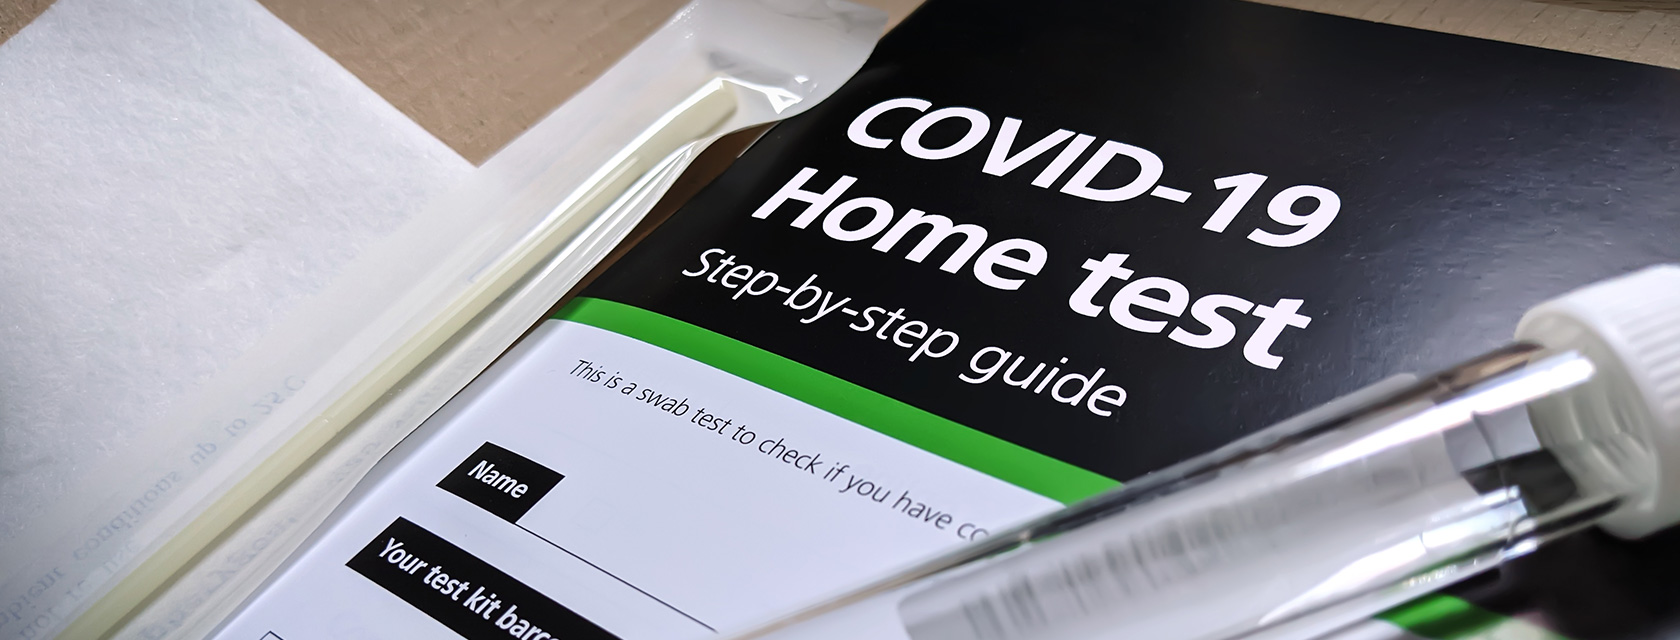 Dartmouth Study Assesses How Consumers Interpret and Act on Results from At-Home Covid-19 Self Tests